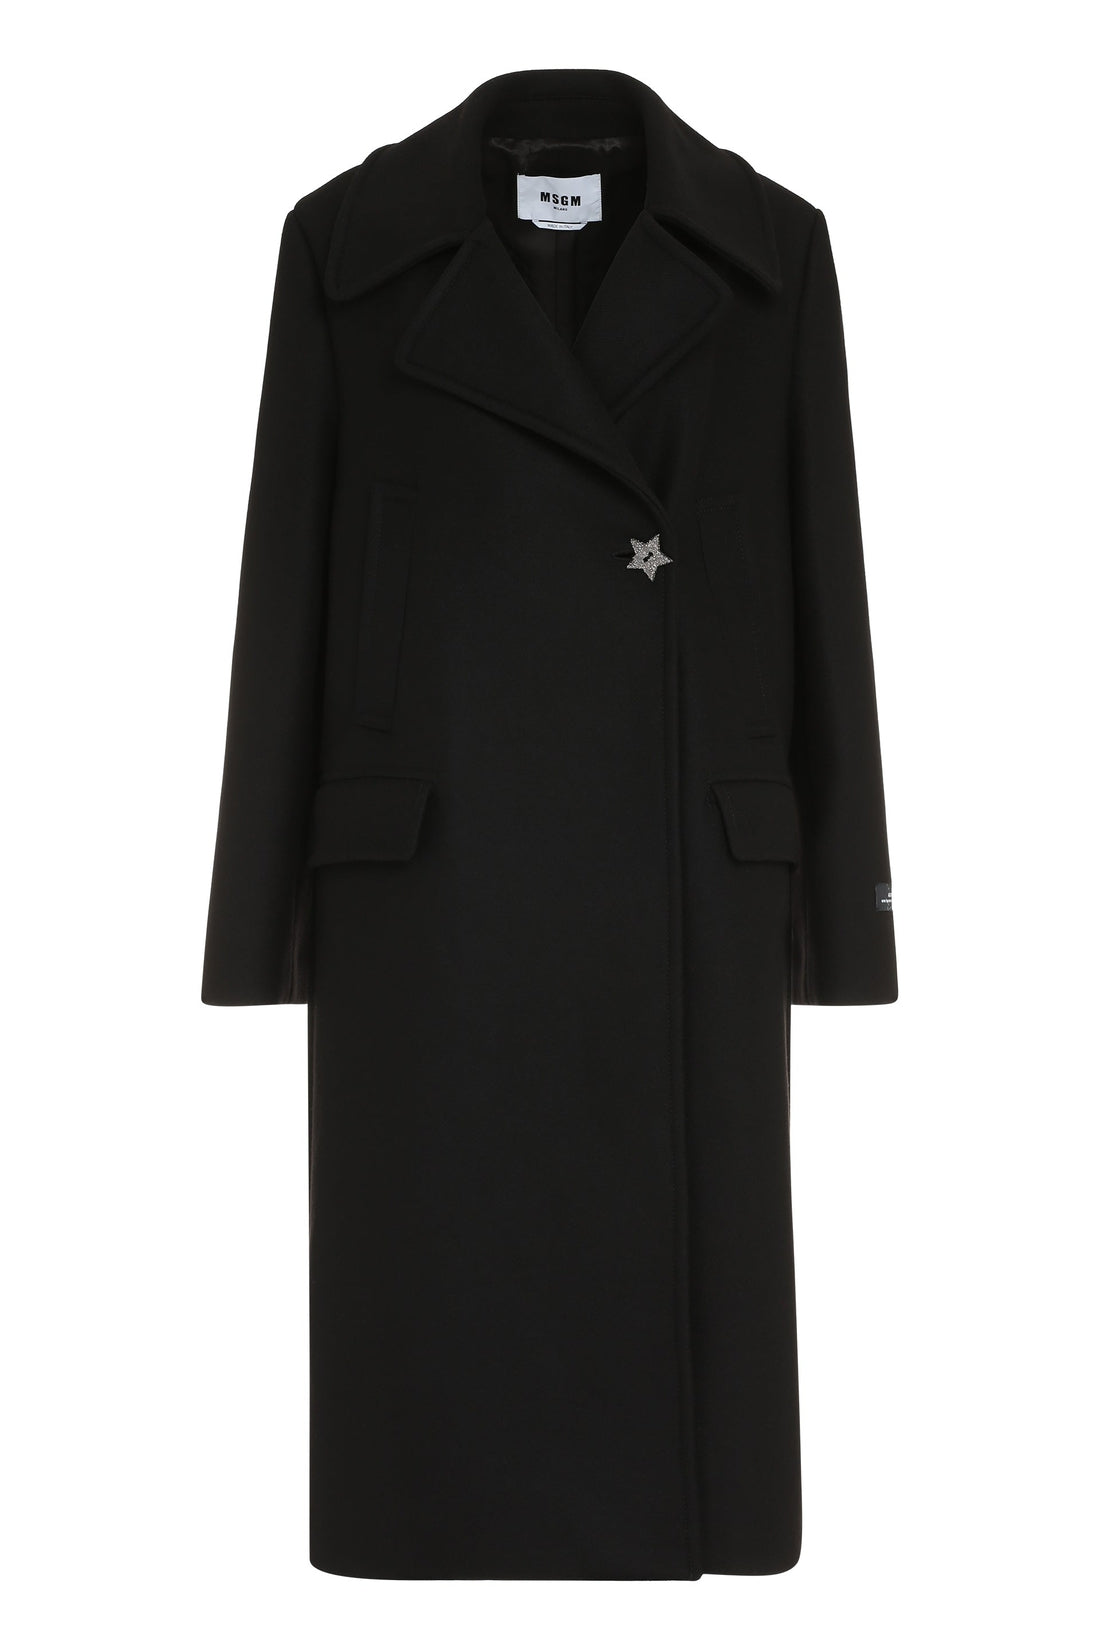 MSGM-OUTLET-SALE-Double-breasted wool coat-ARCHIVIST